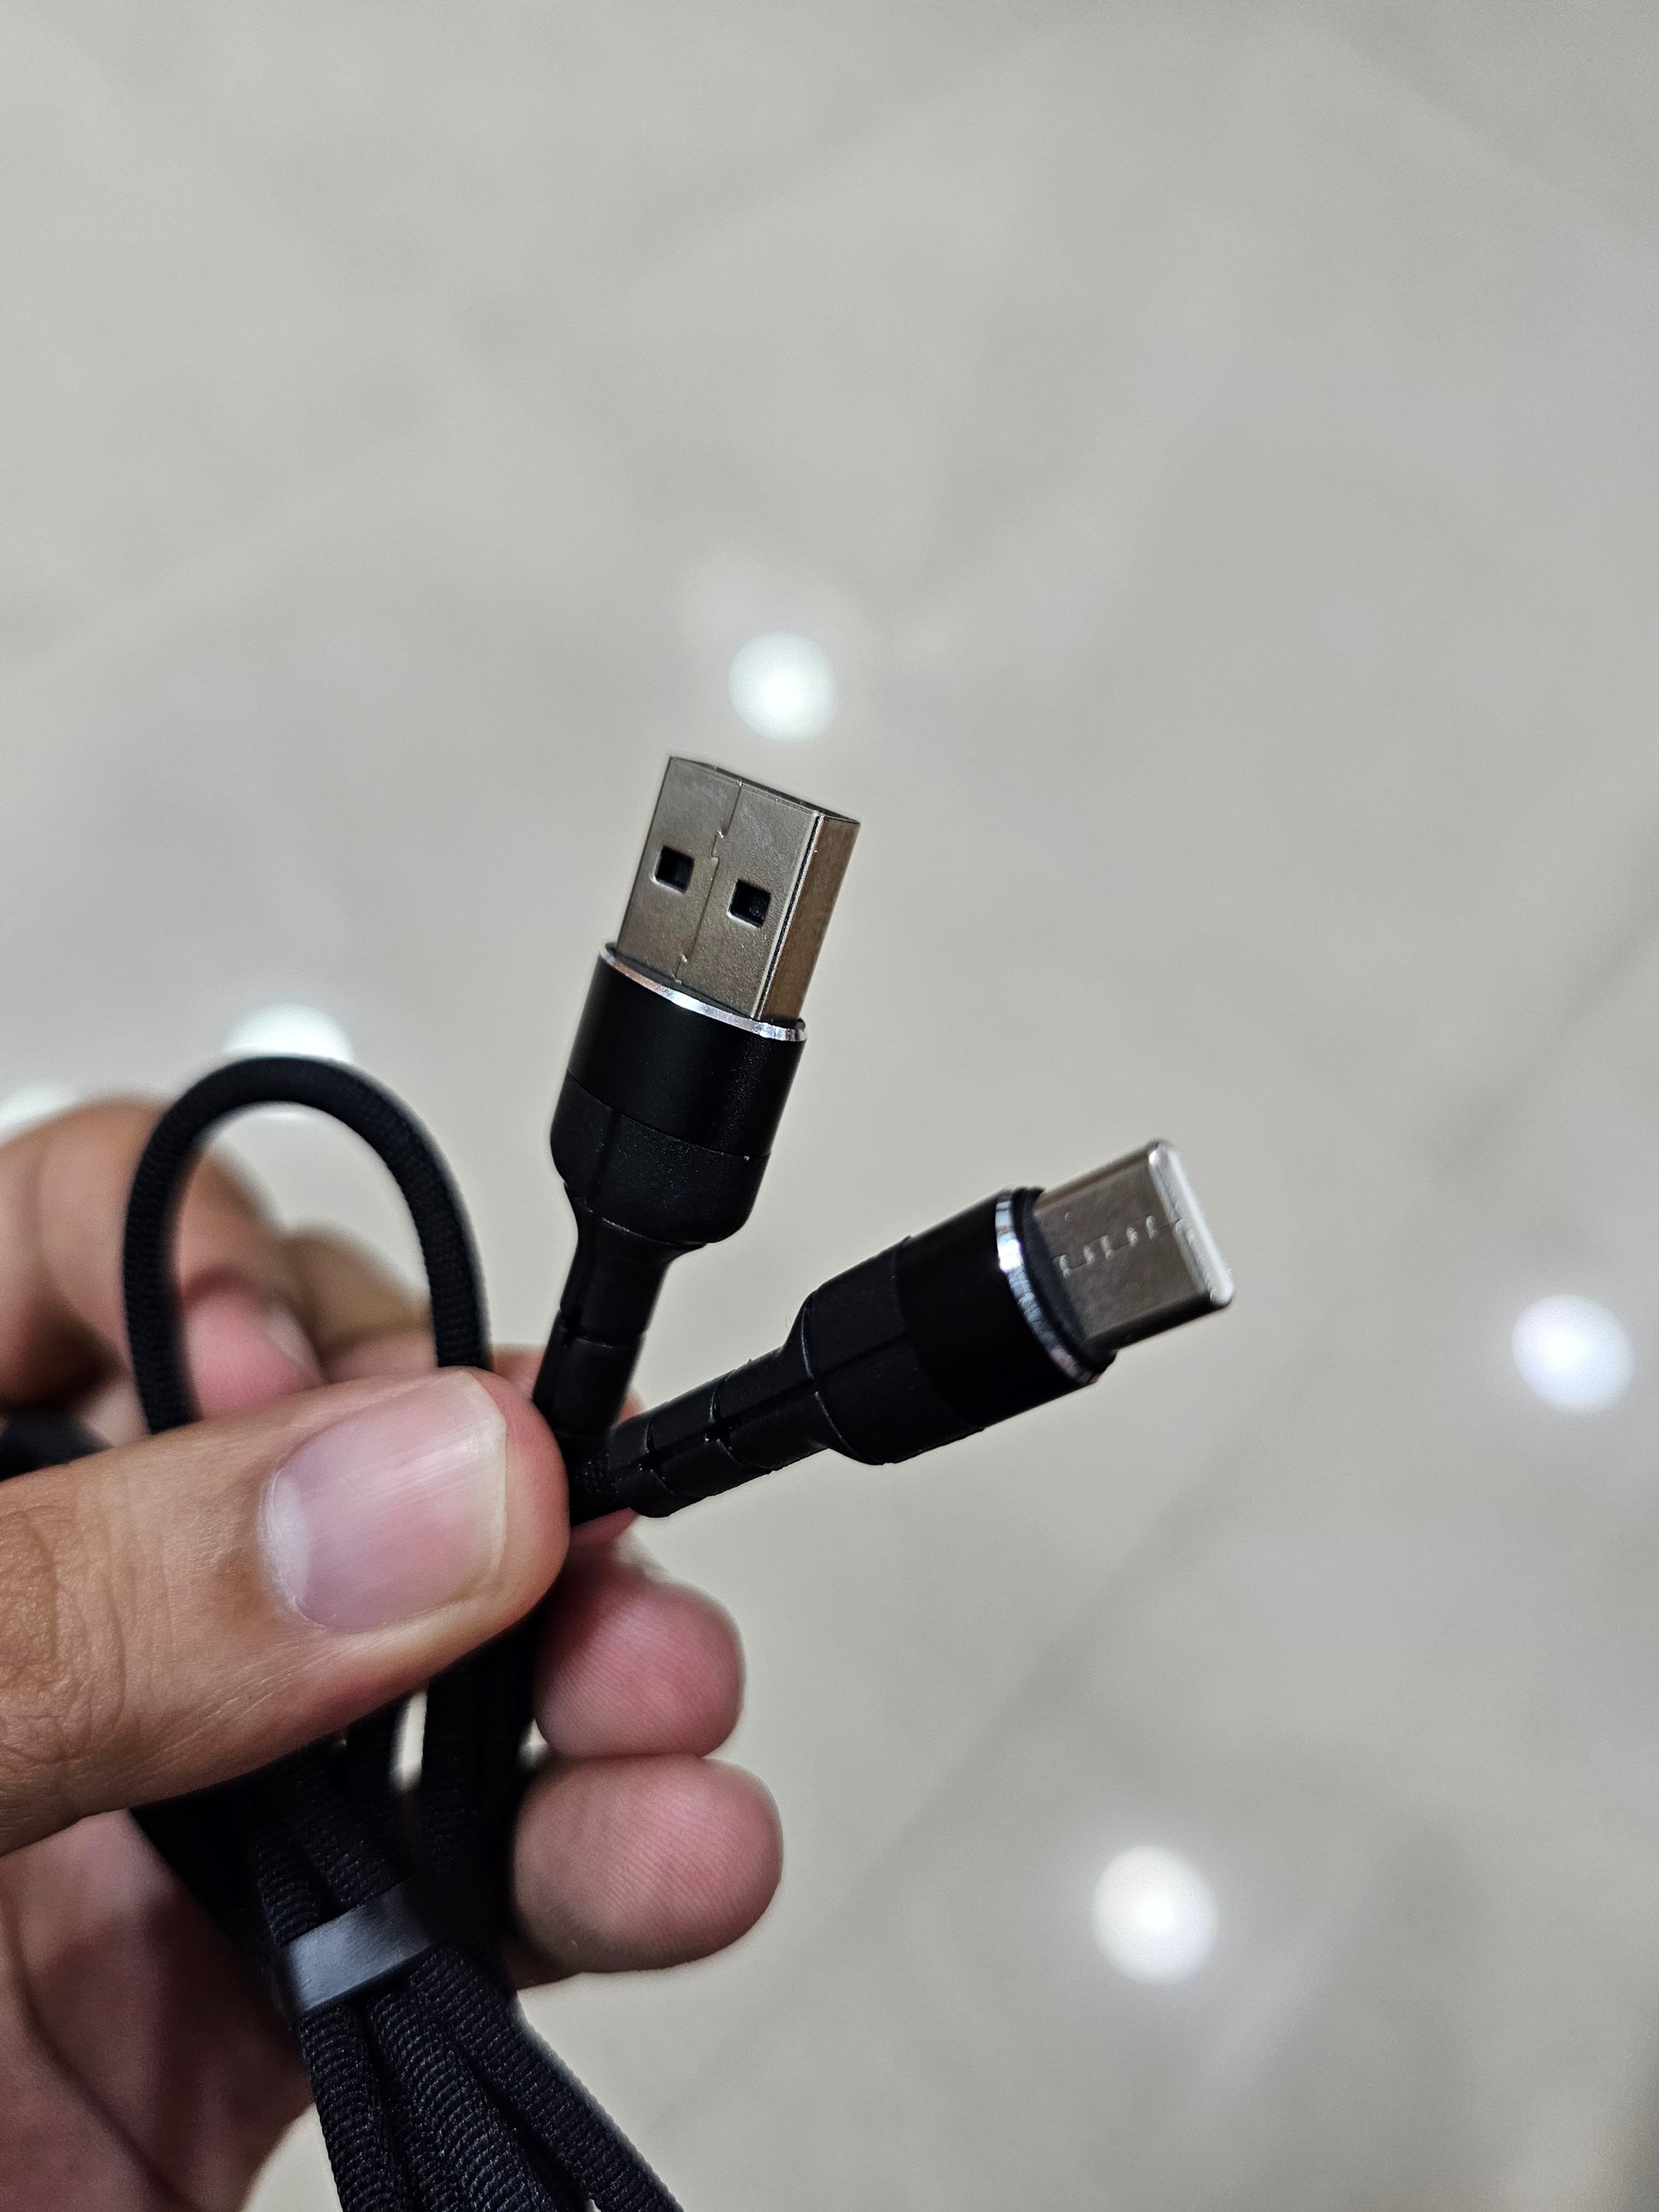 How to Tell if a USB Cable Supports High Speed